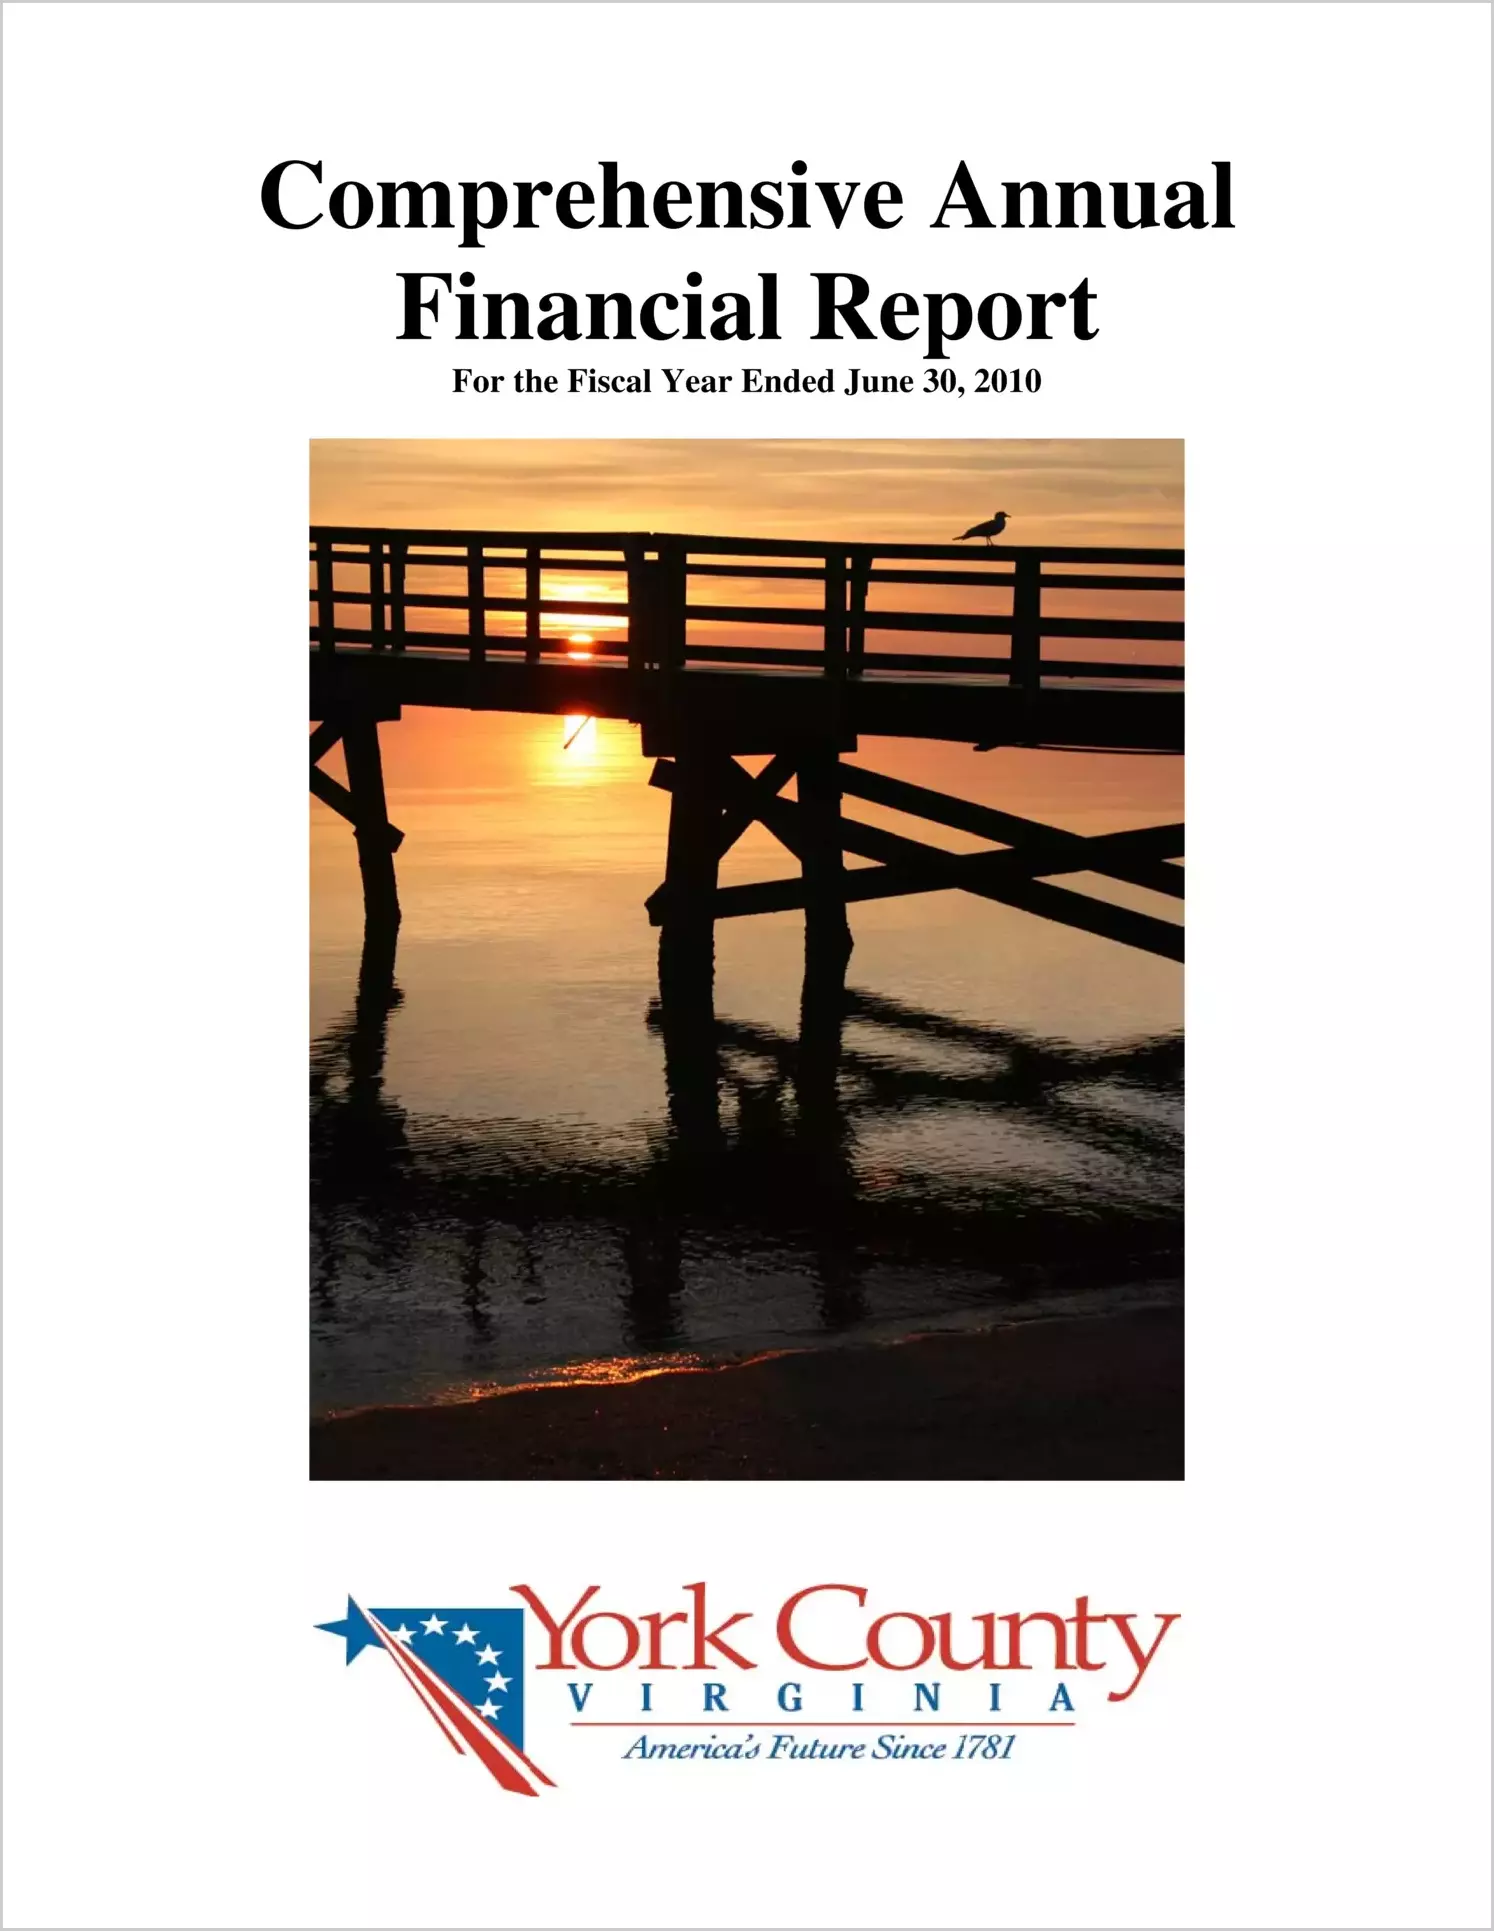 2010 Annual Financial Report for County of York